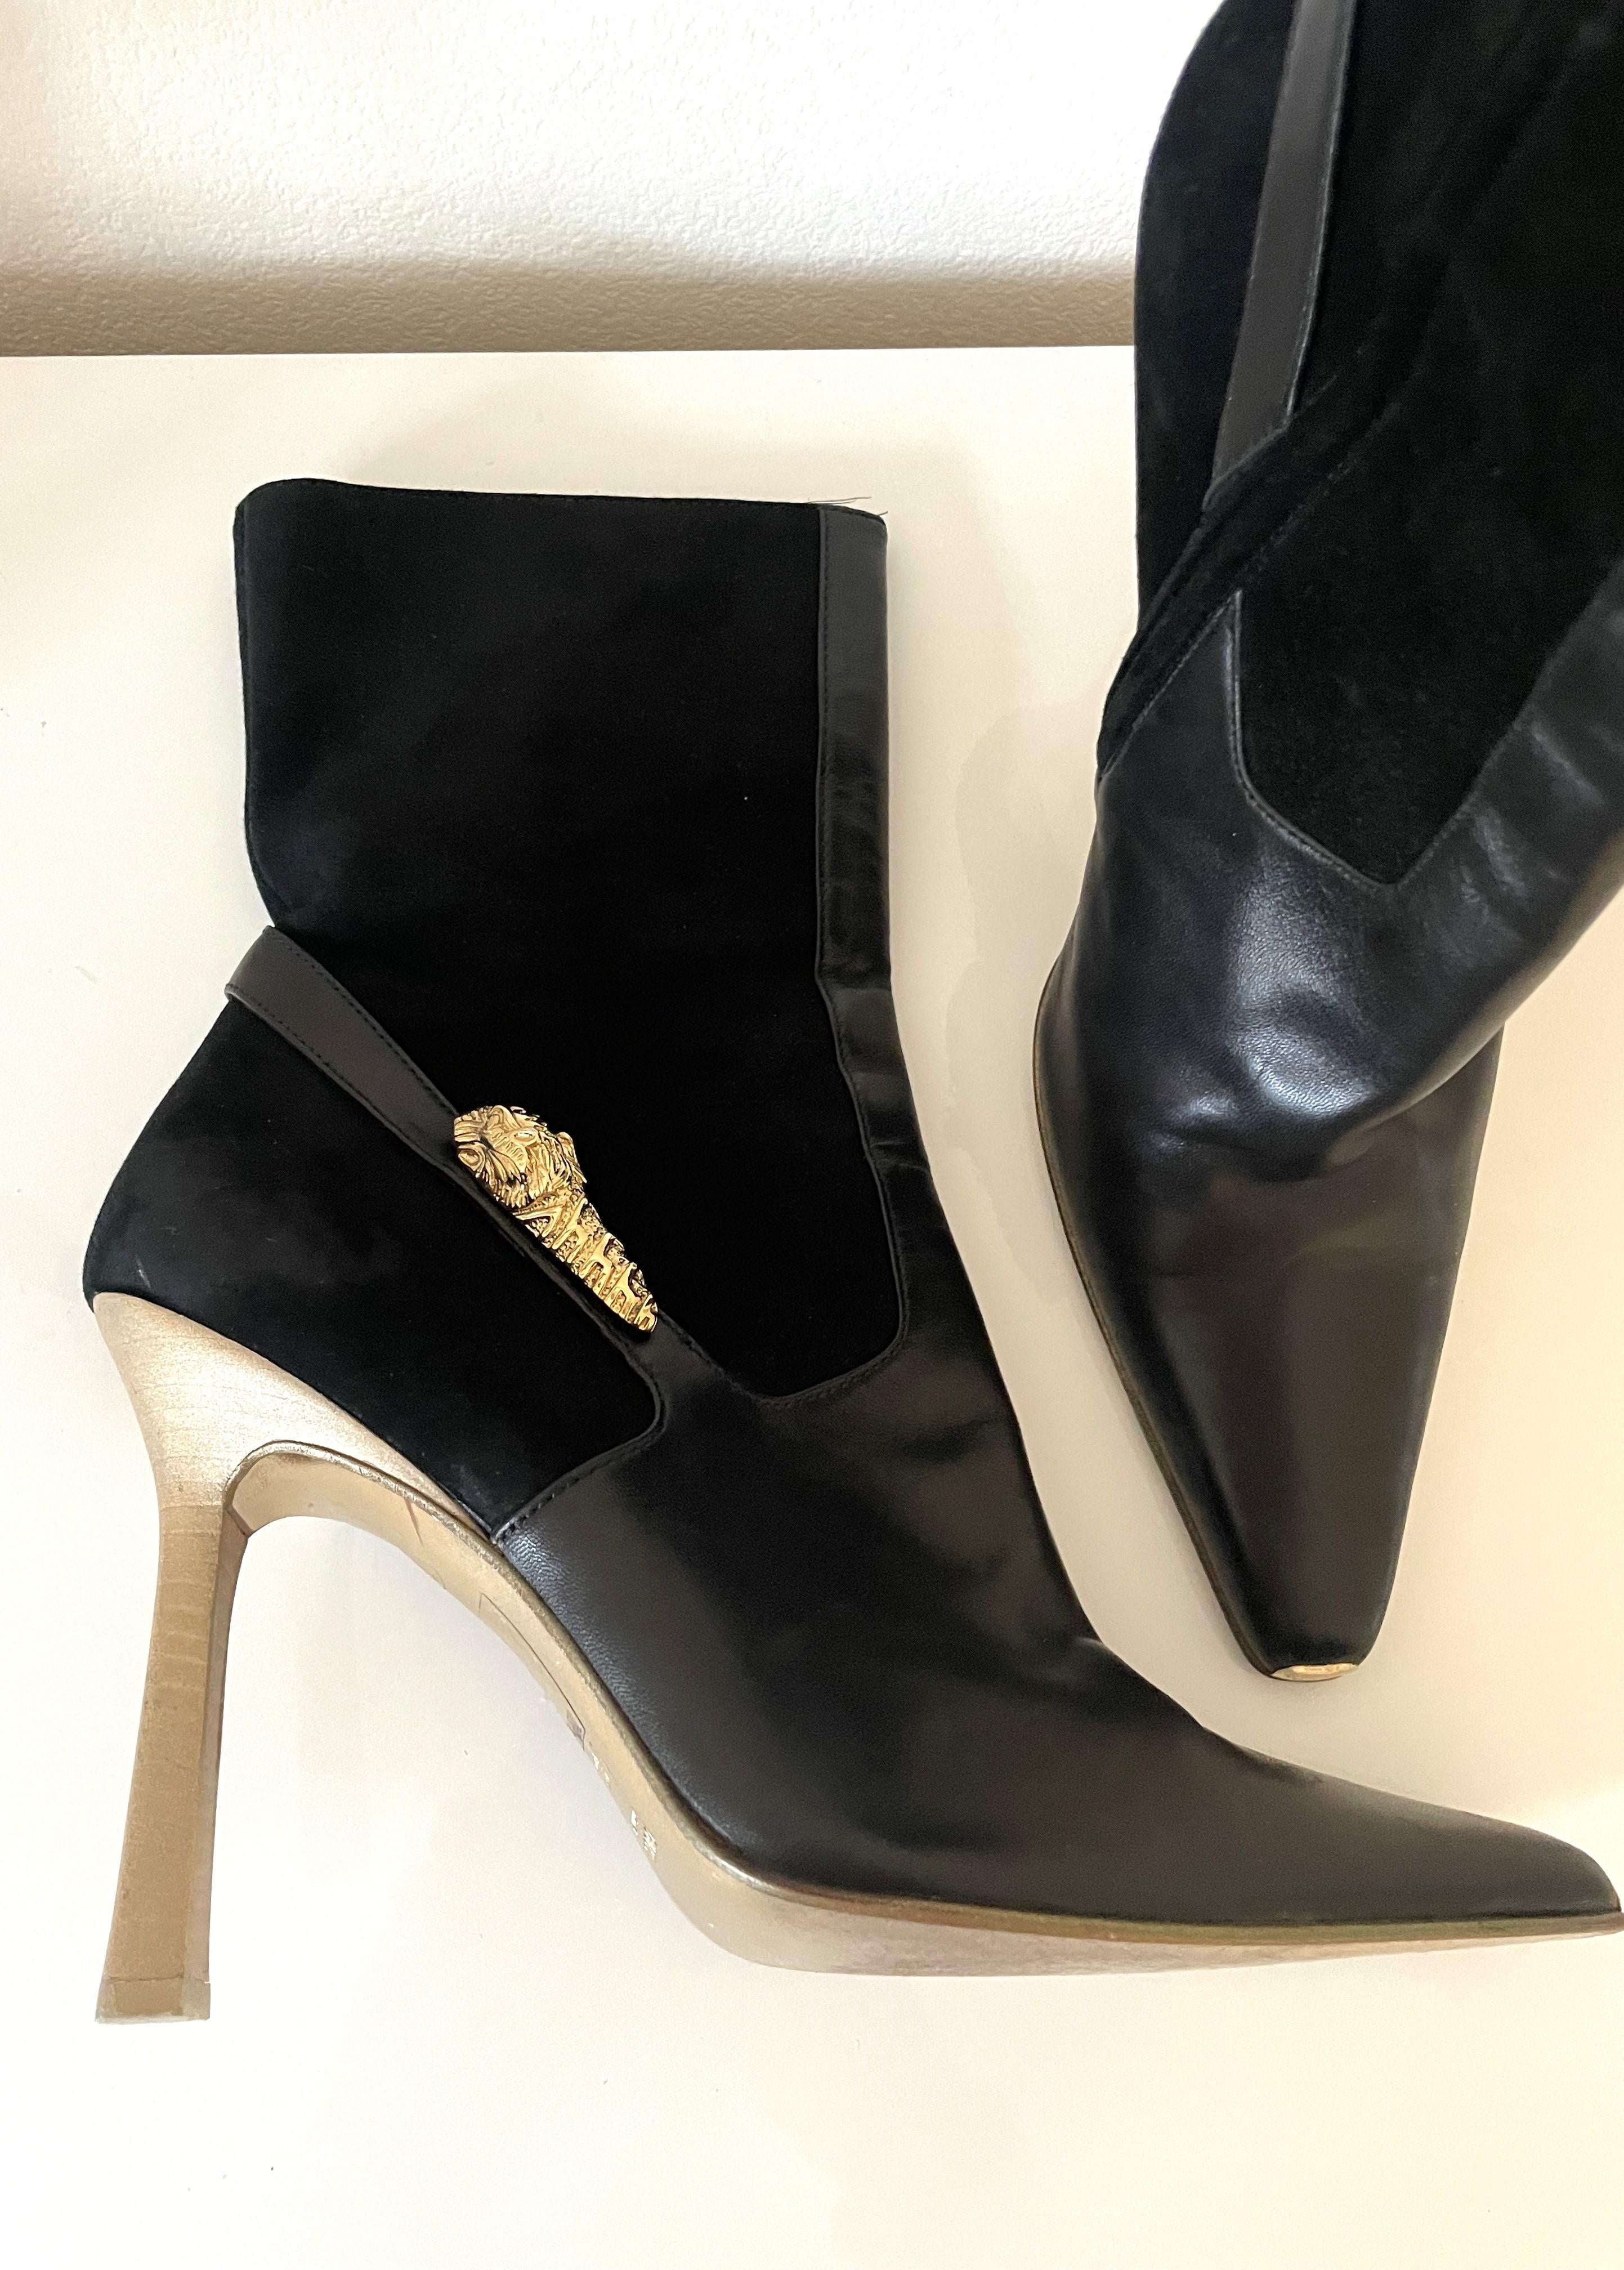 Noir Gucci Rare Black Suede Leather High Heel Ankle Boots Gold Metal Panther en vente